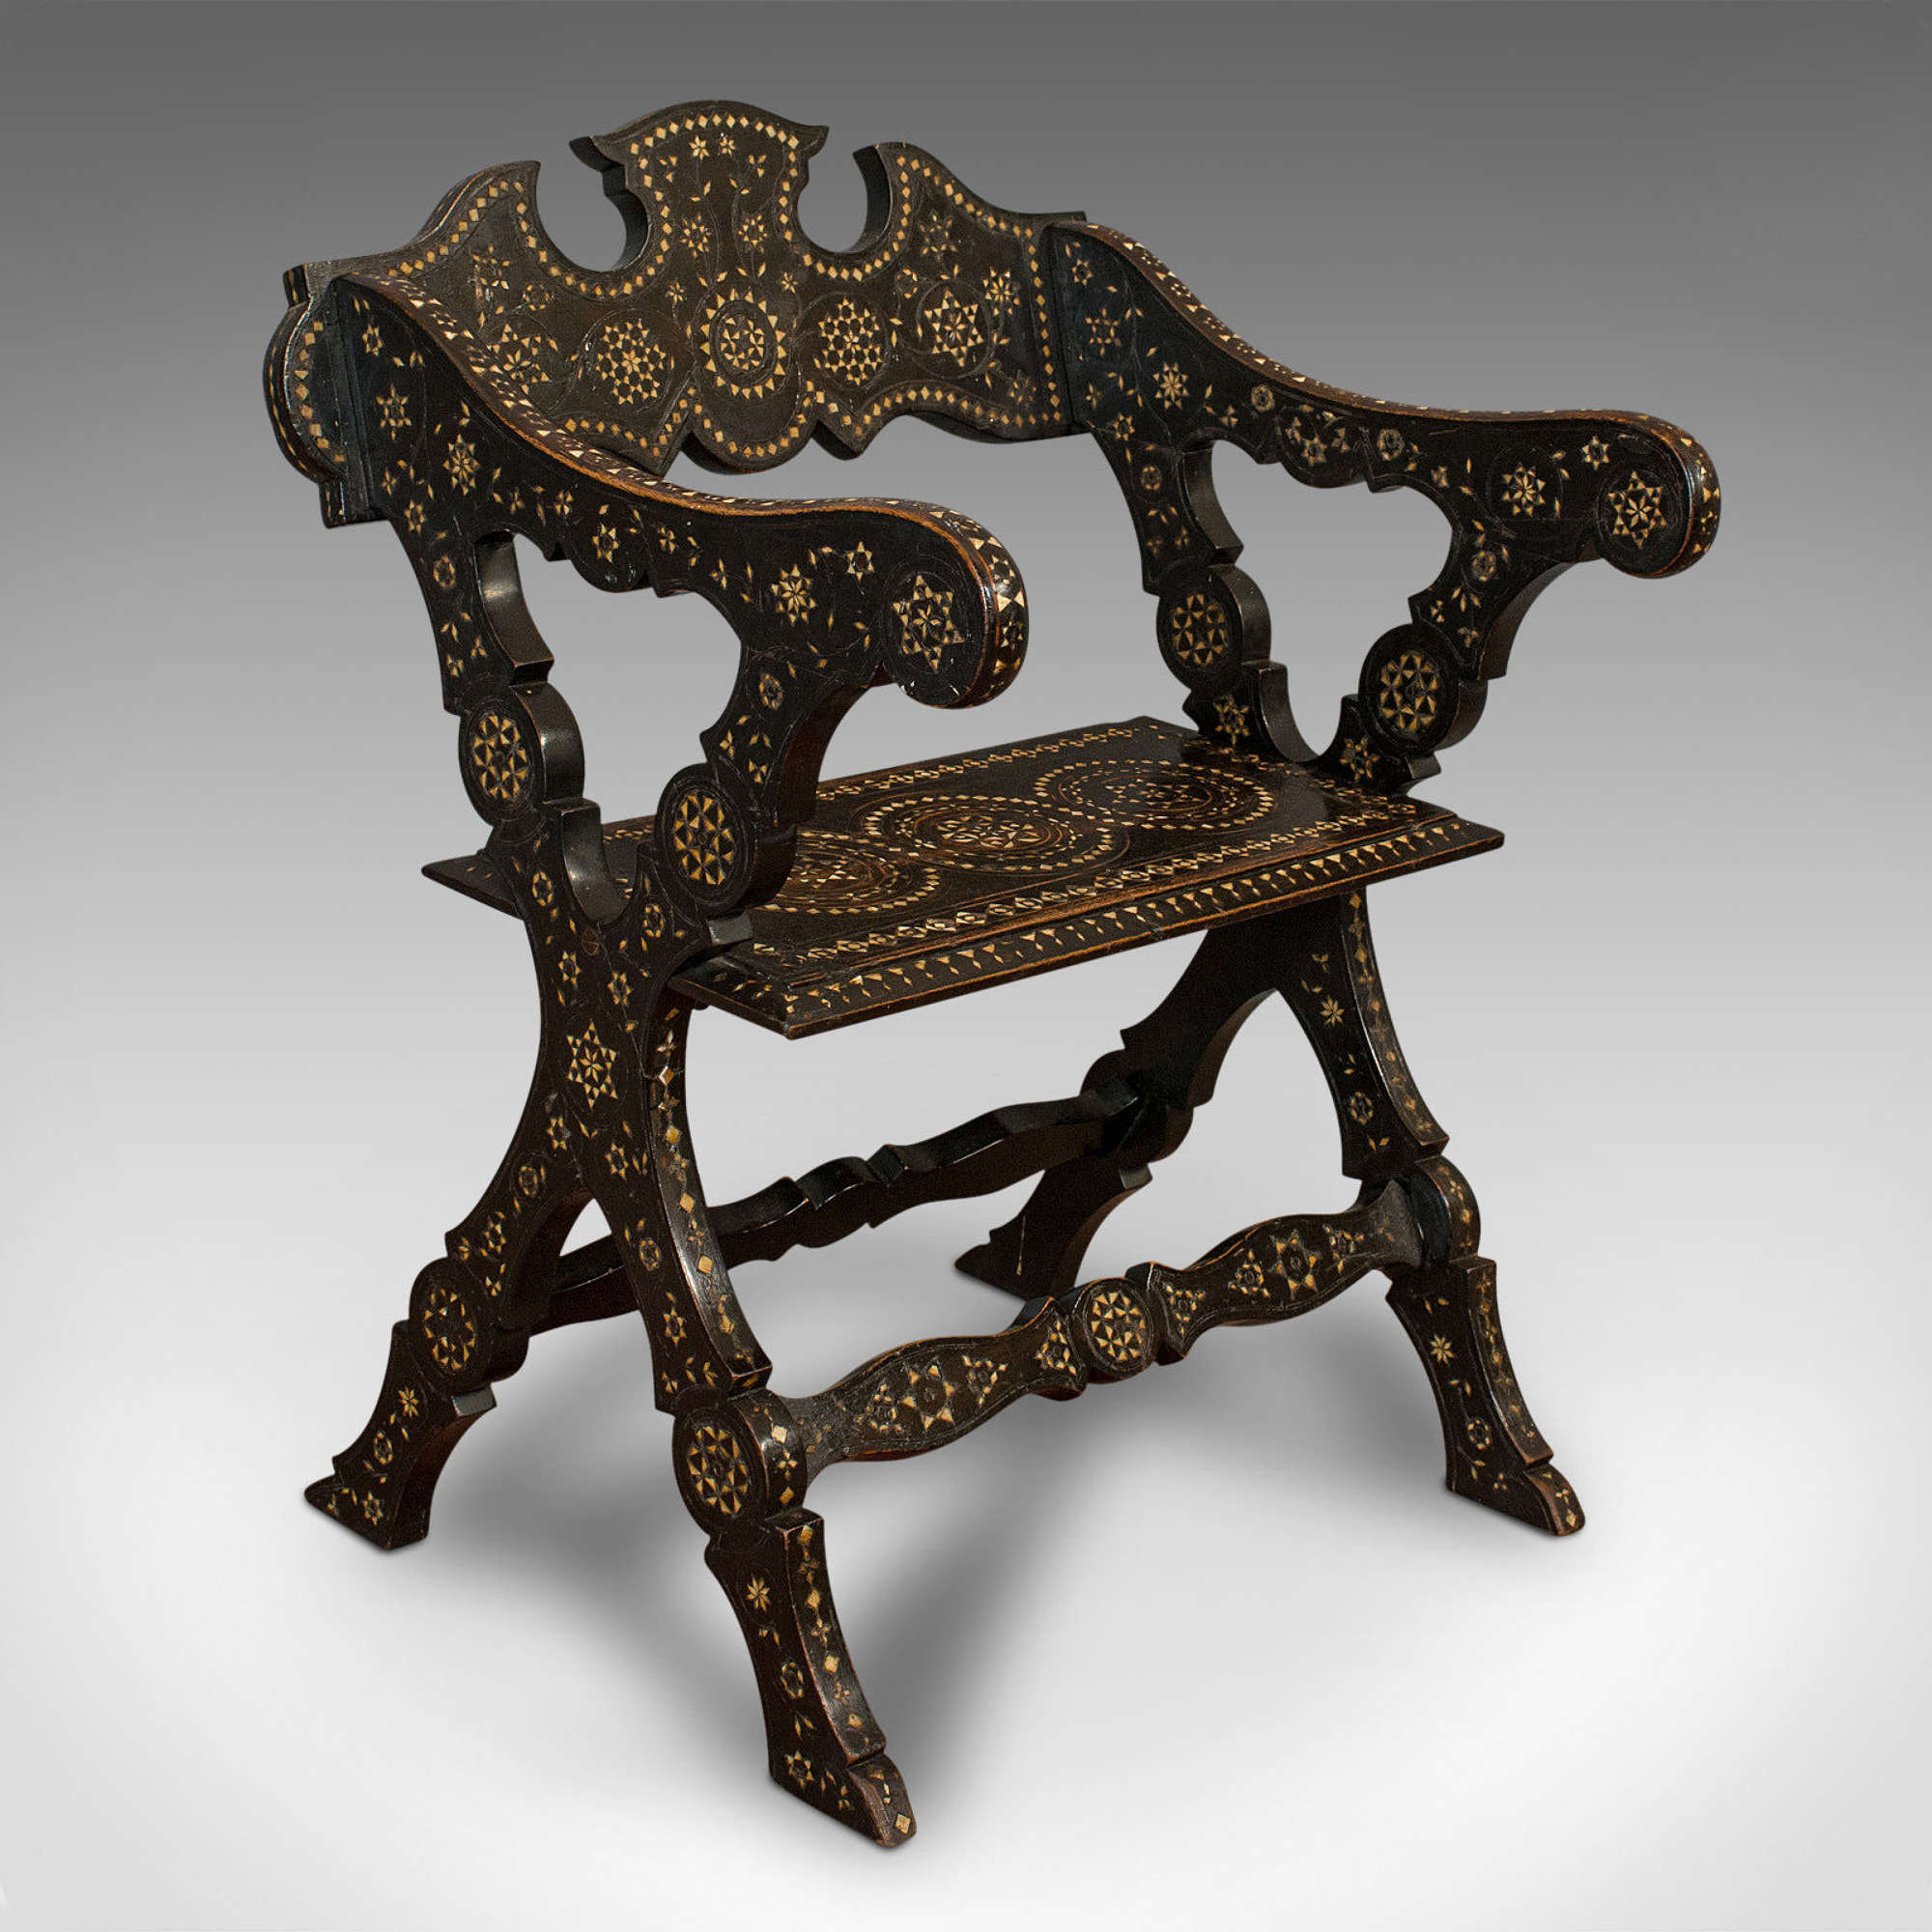 Antique X-frame Chair, Middle Eastern, Mahogany, Seat, Bone Inlay C.1850